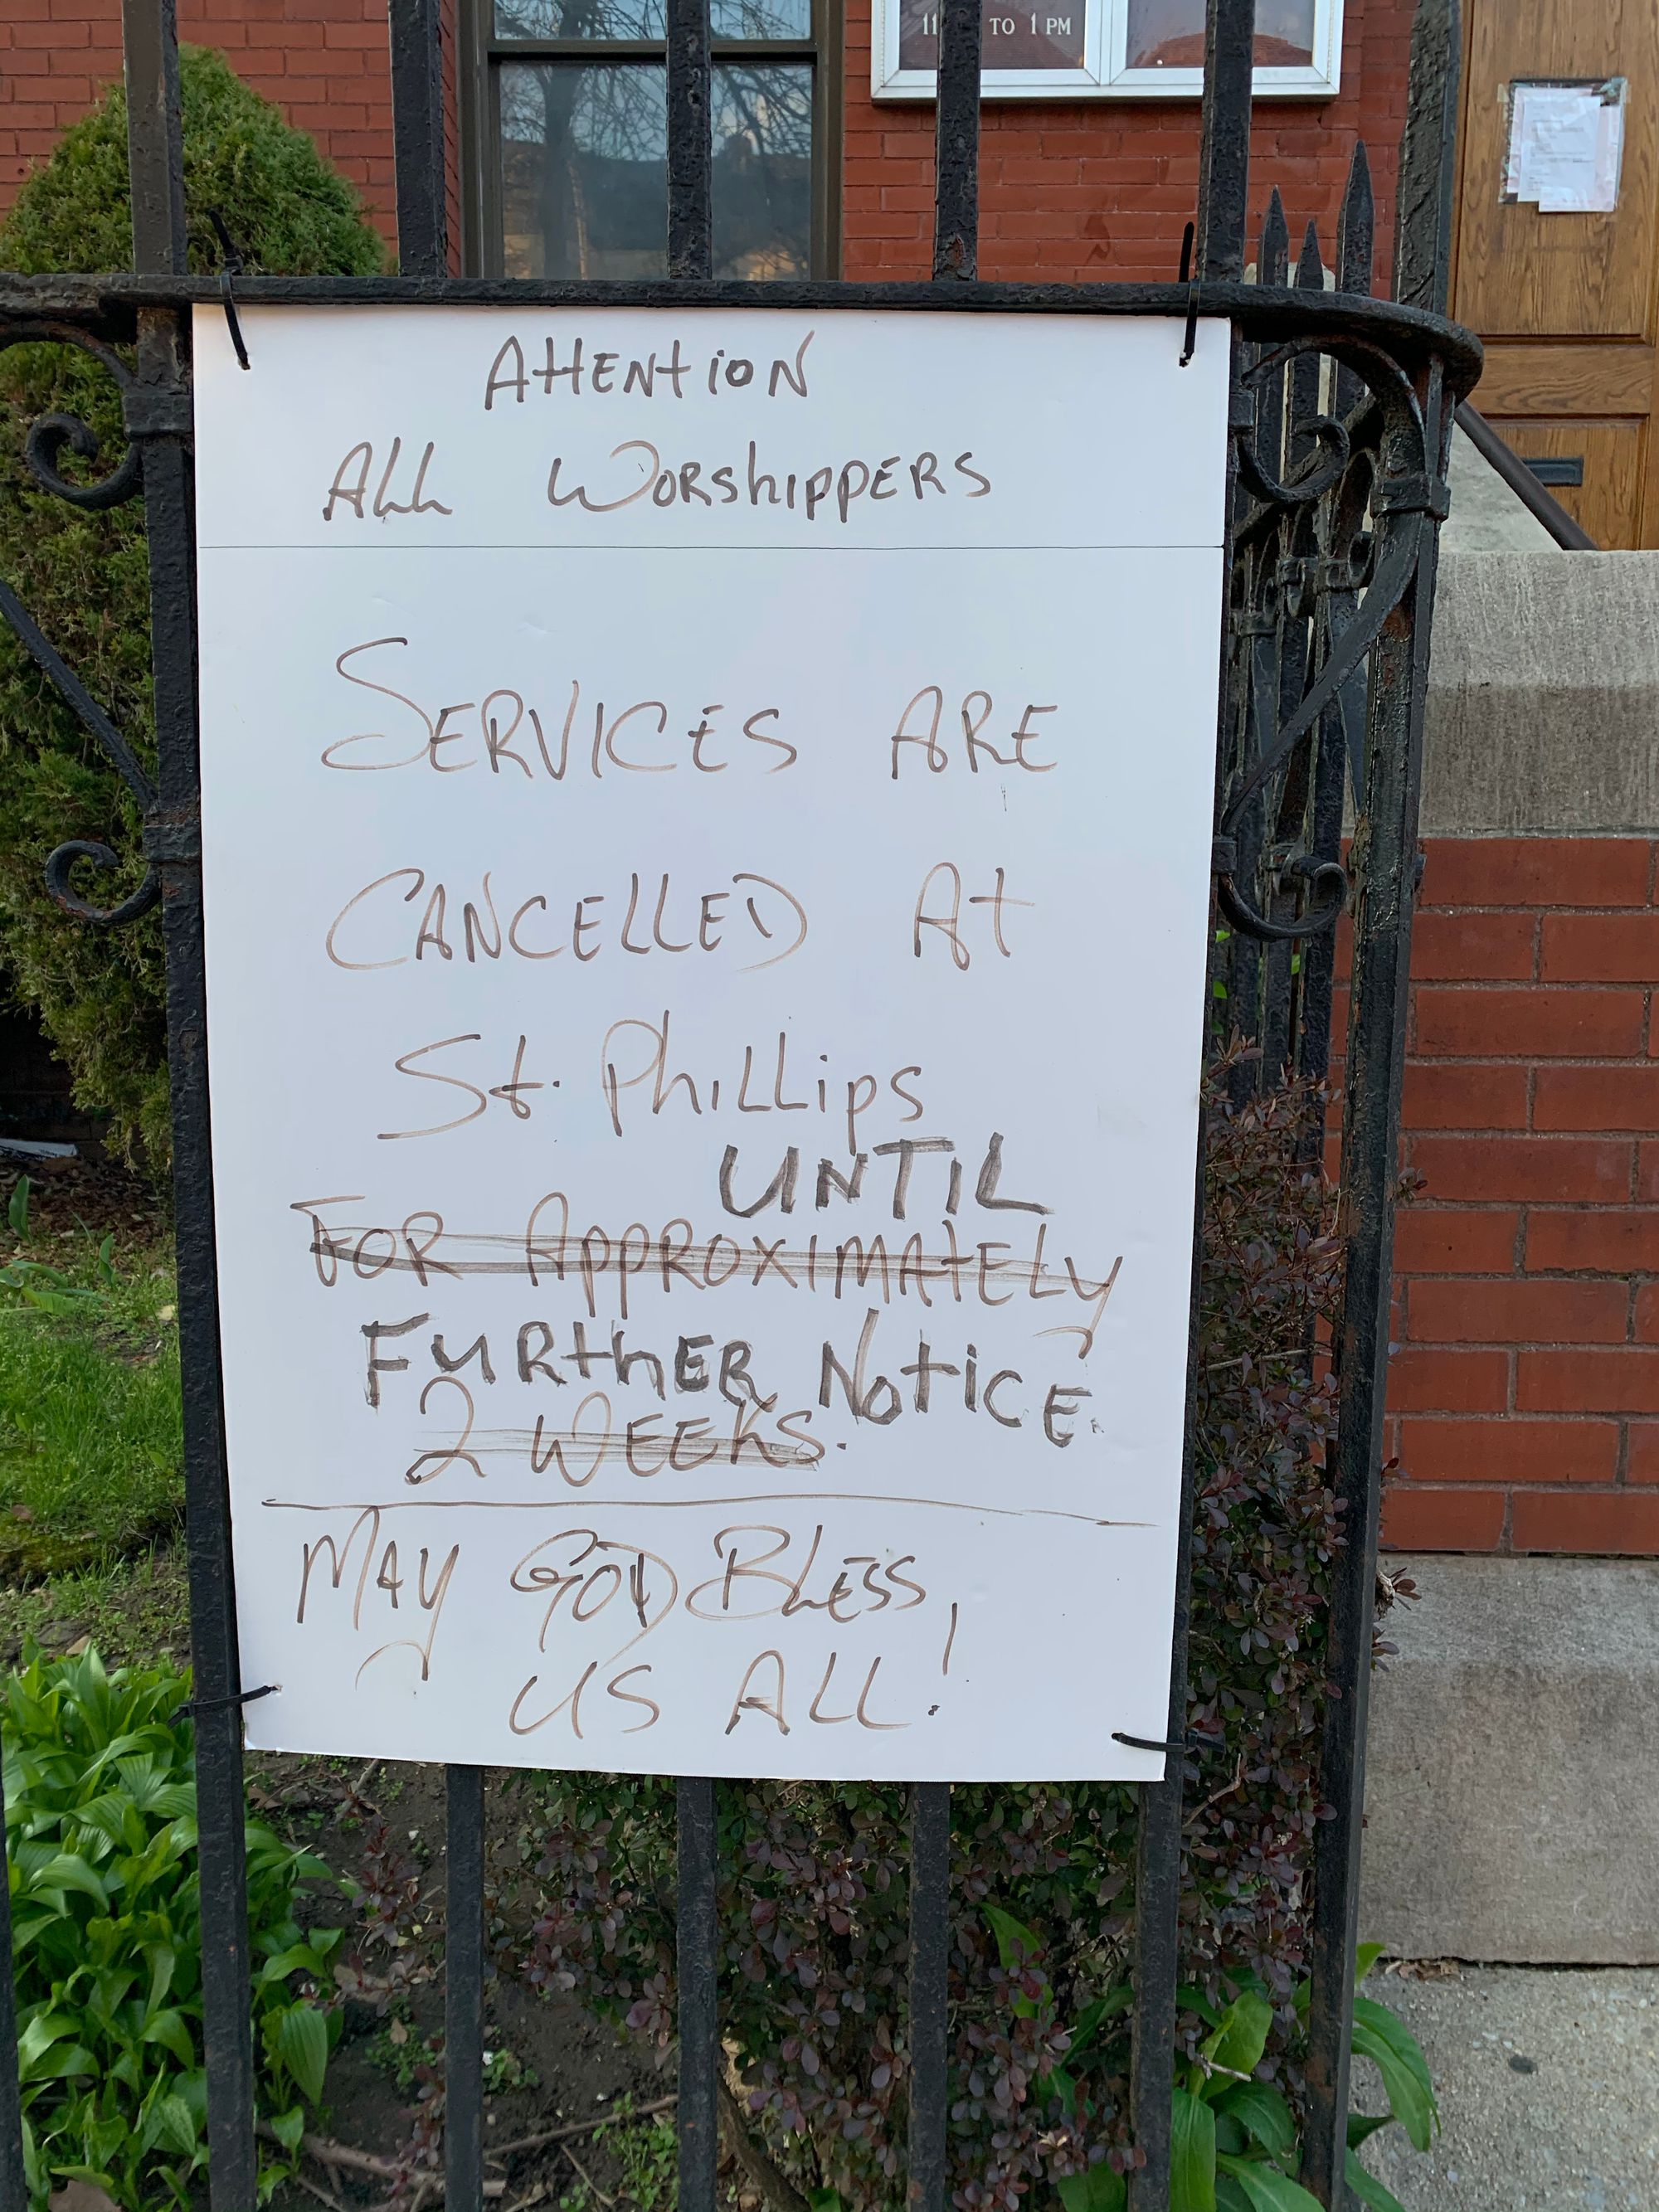 Hand-written sign taped to a mailbox that reads "Dear Worshippers, All services canceled until further notice."